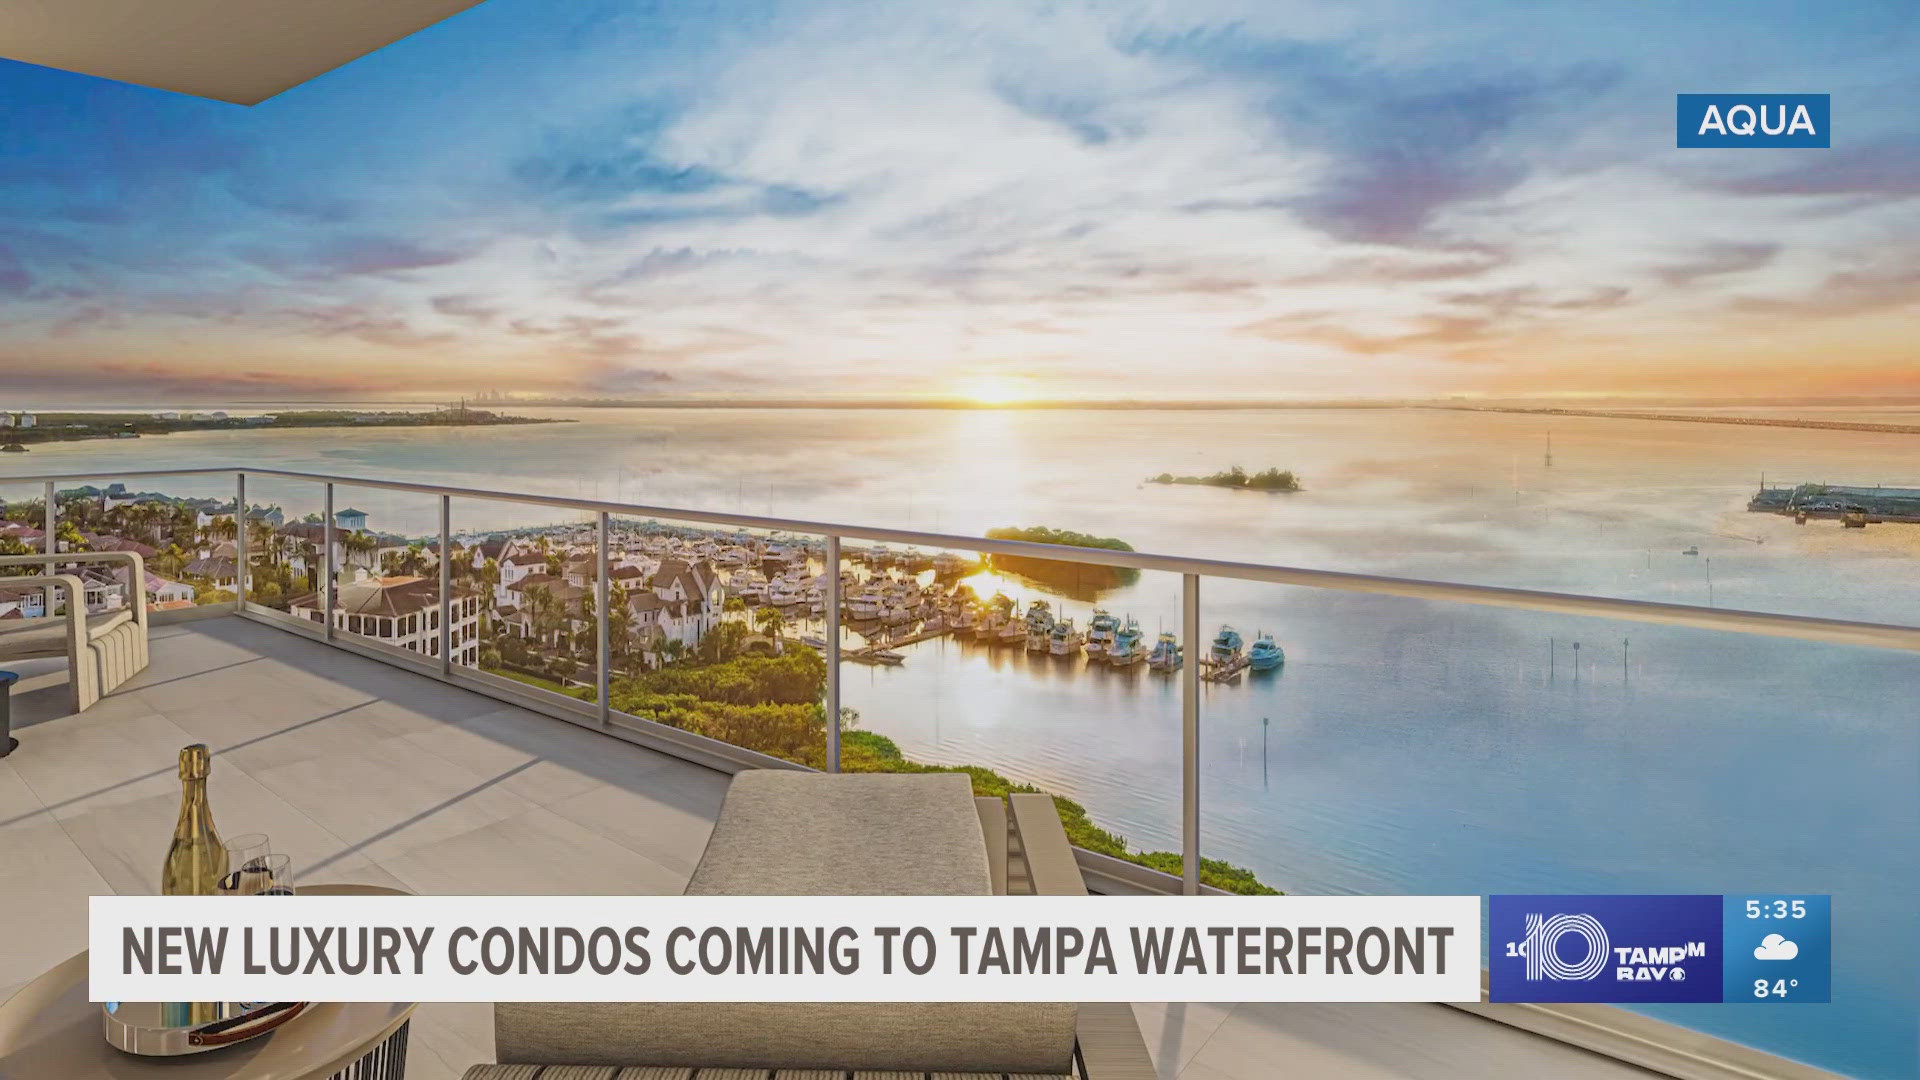 Aqua is expected to tower over Old Tampa Bay near the Westshore Yacht Club.